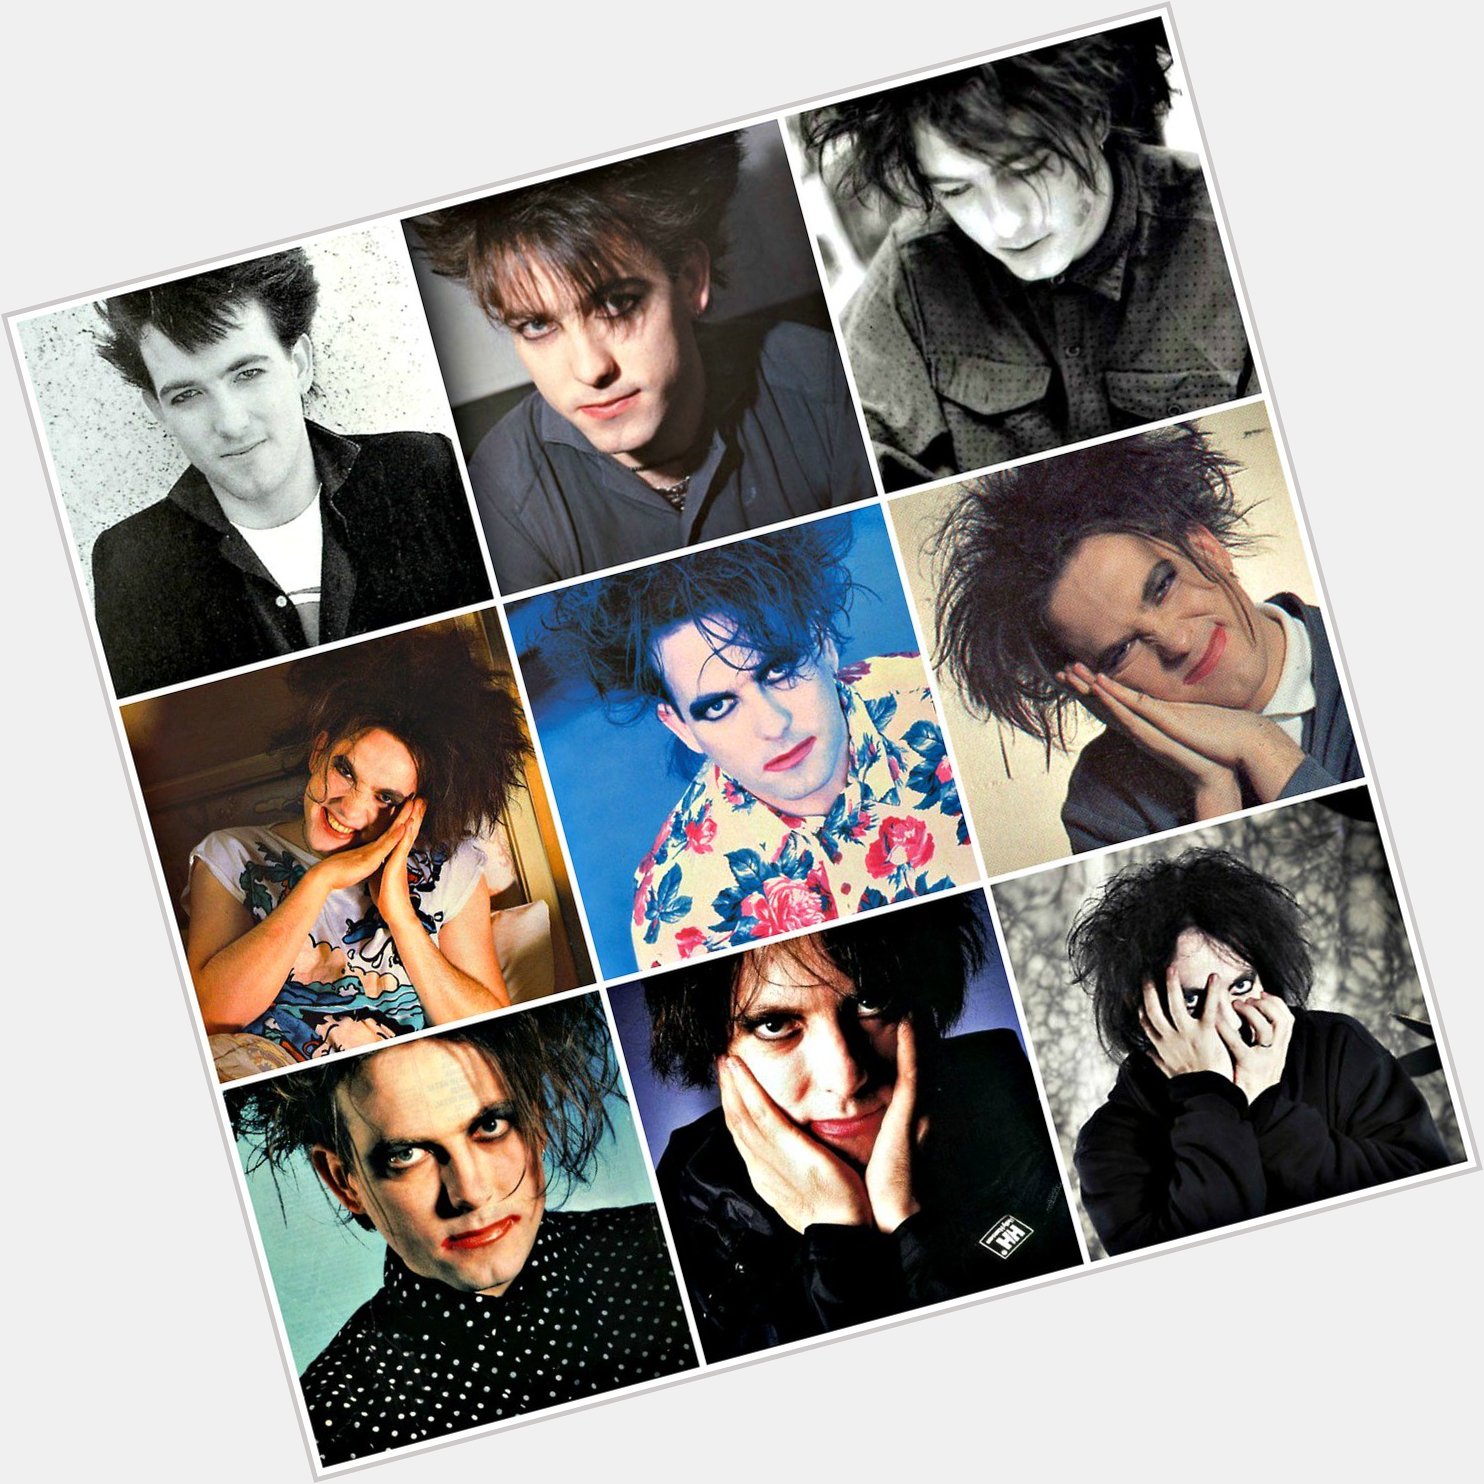 A very happy birthday to Robert Smith of born 21st April 1959 